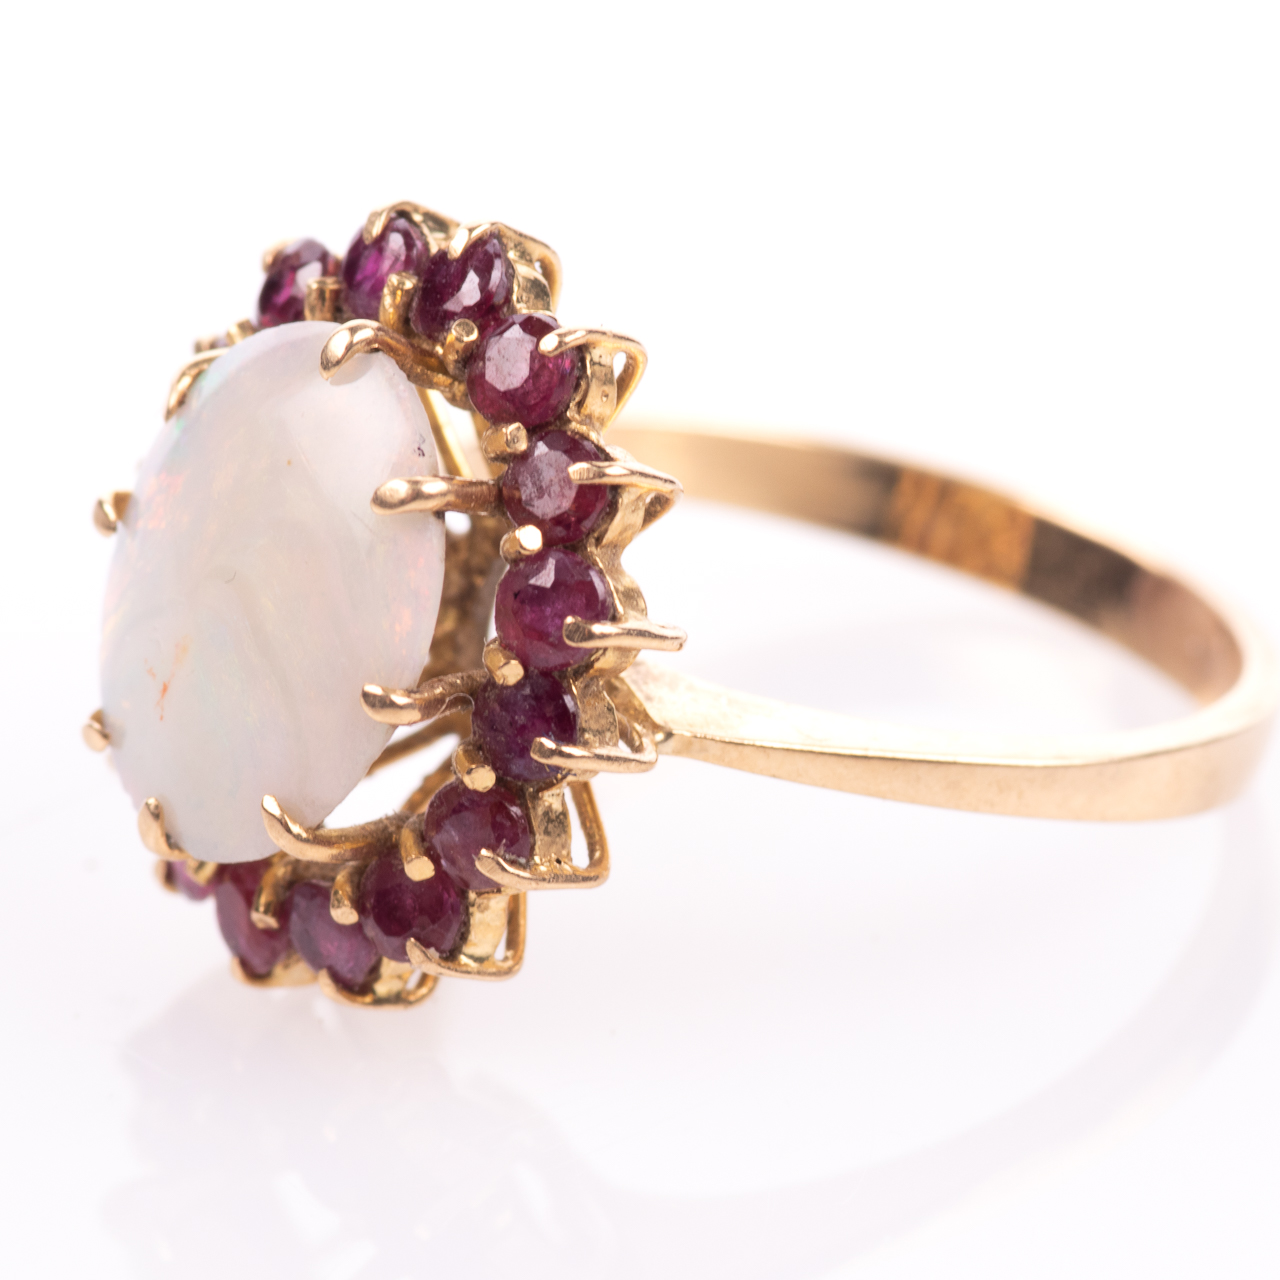 18ct Gold Solid 1.40ct Opal & 2.40ct Ruby Ring - Image 4 of 7